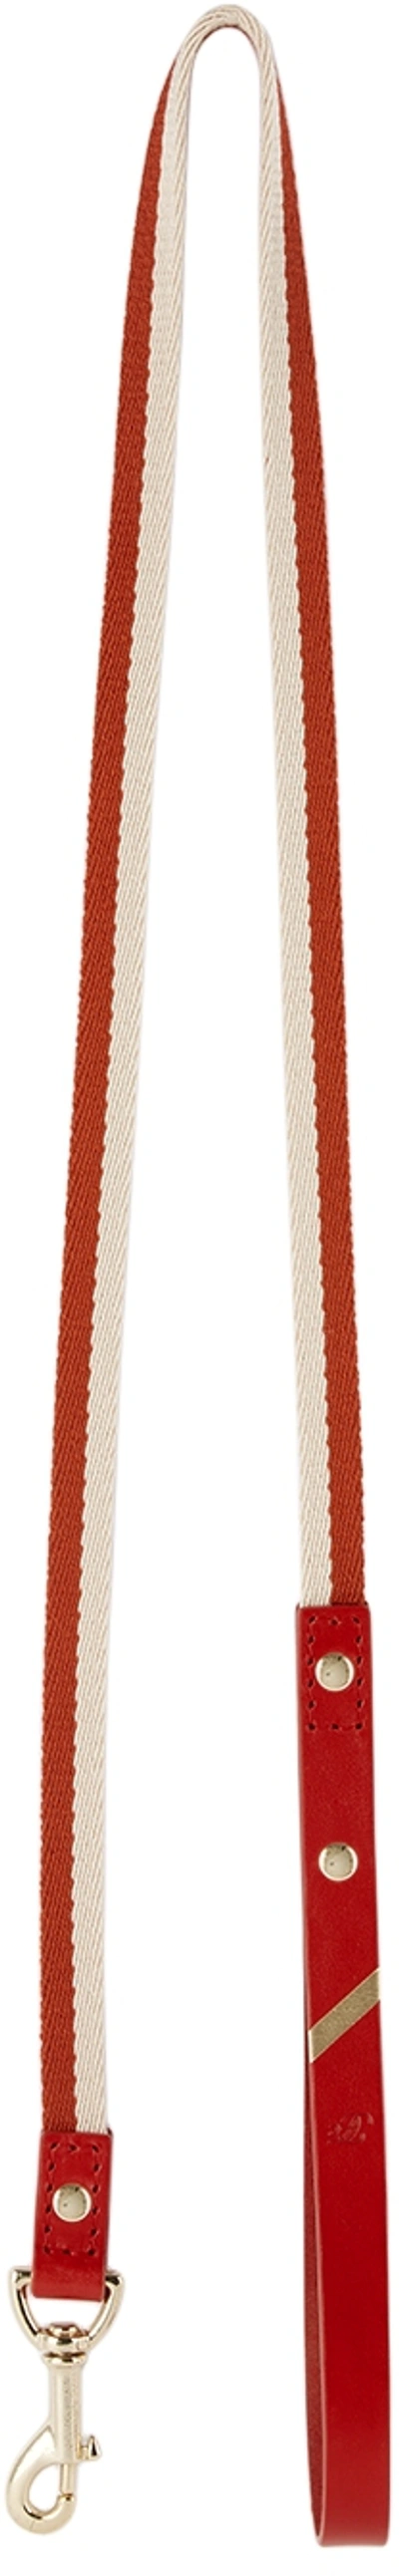 Shop Fantastical Creatures Club Red & Off-white Stylish Me Leash In Monte Carlo